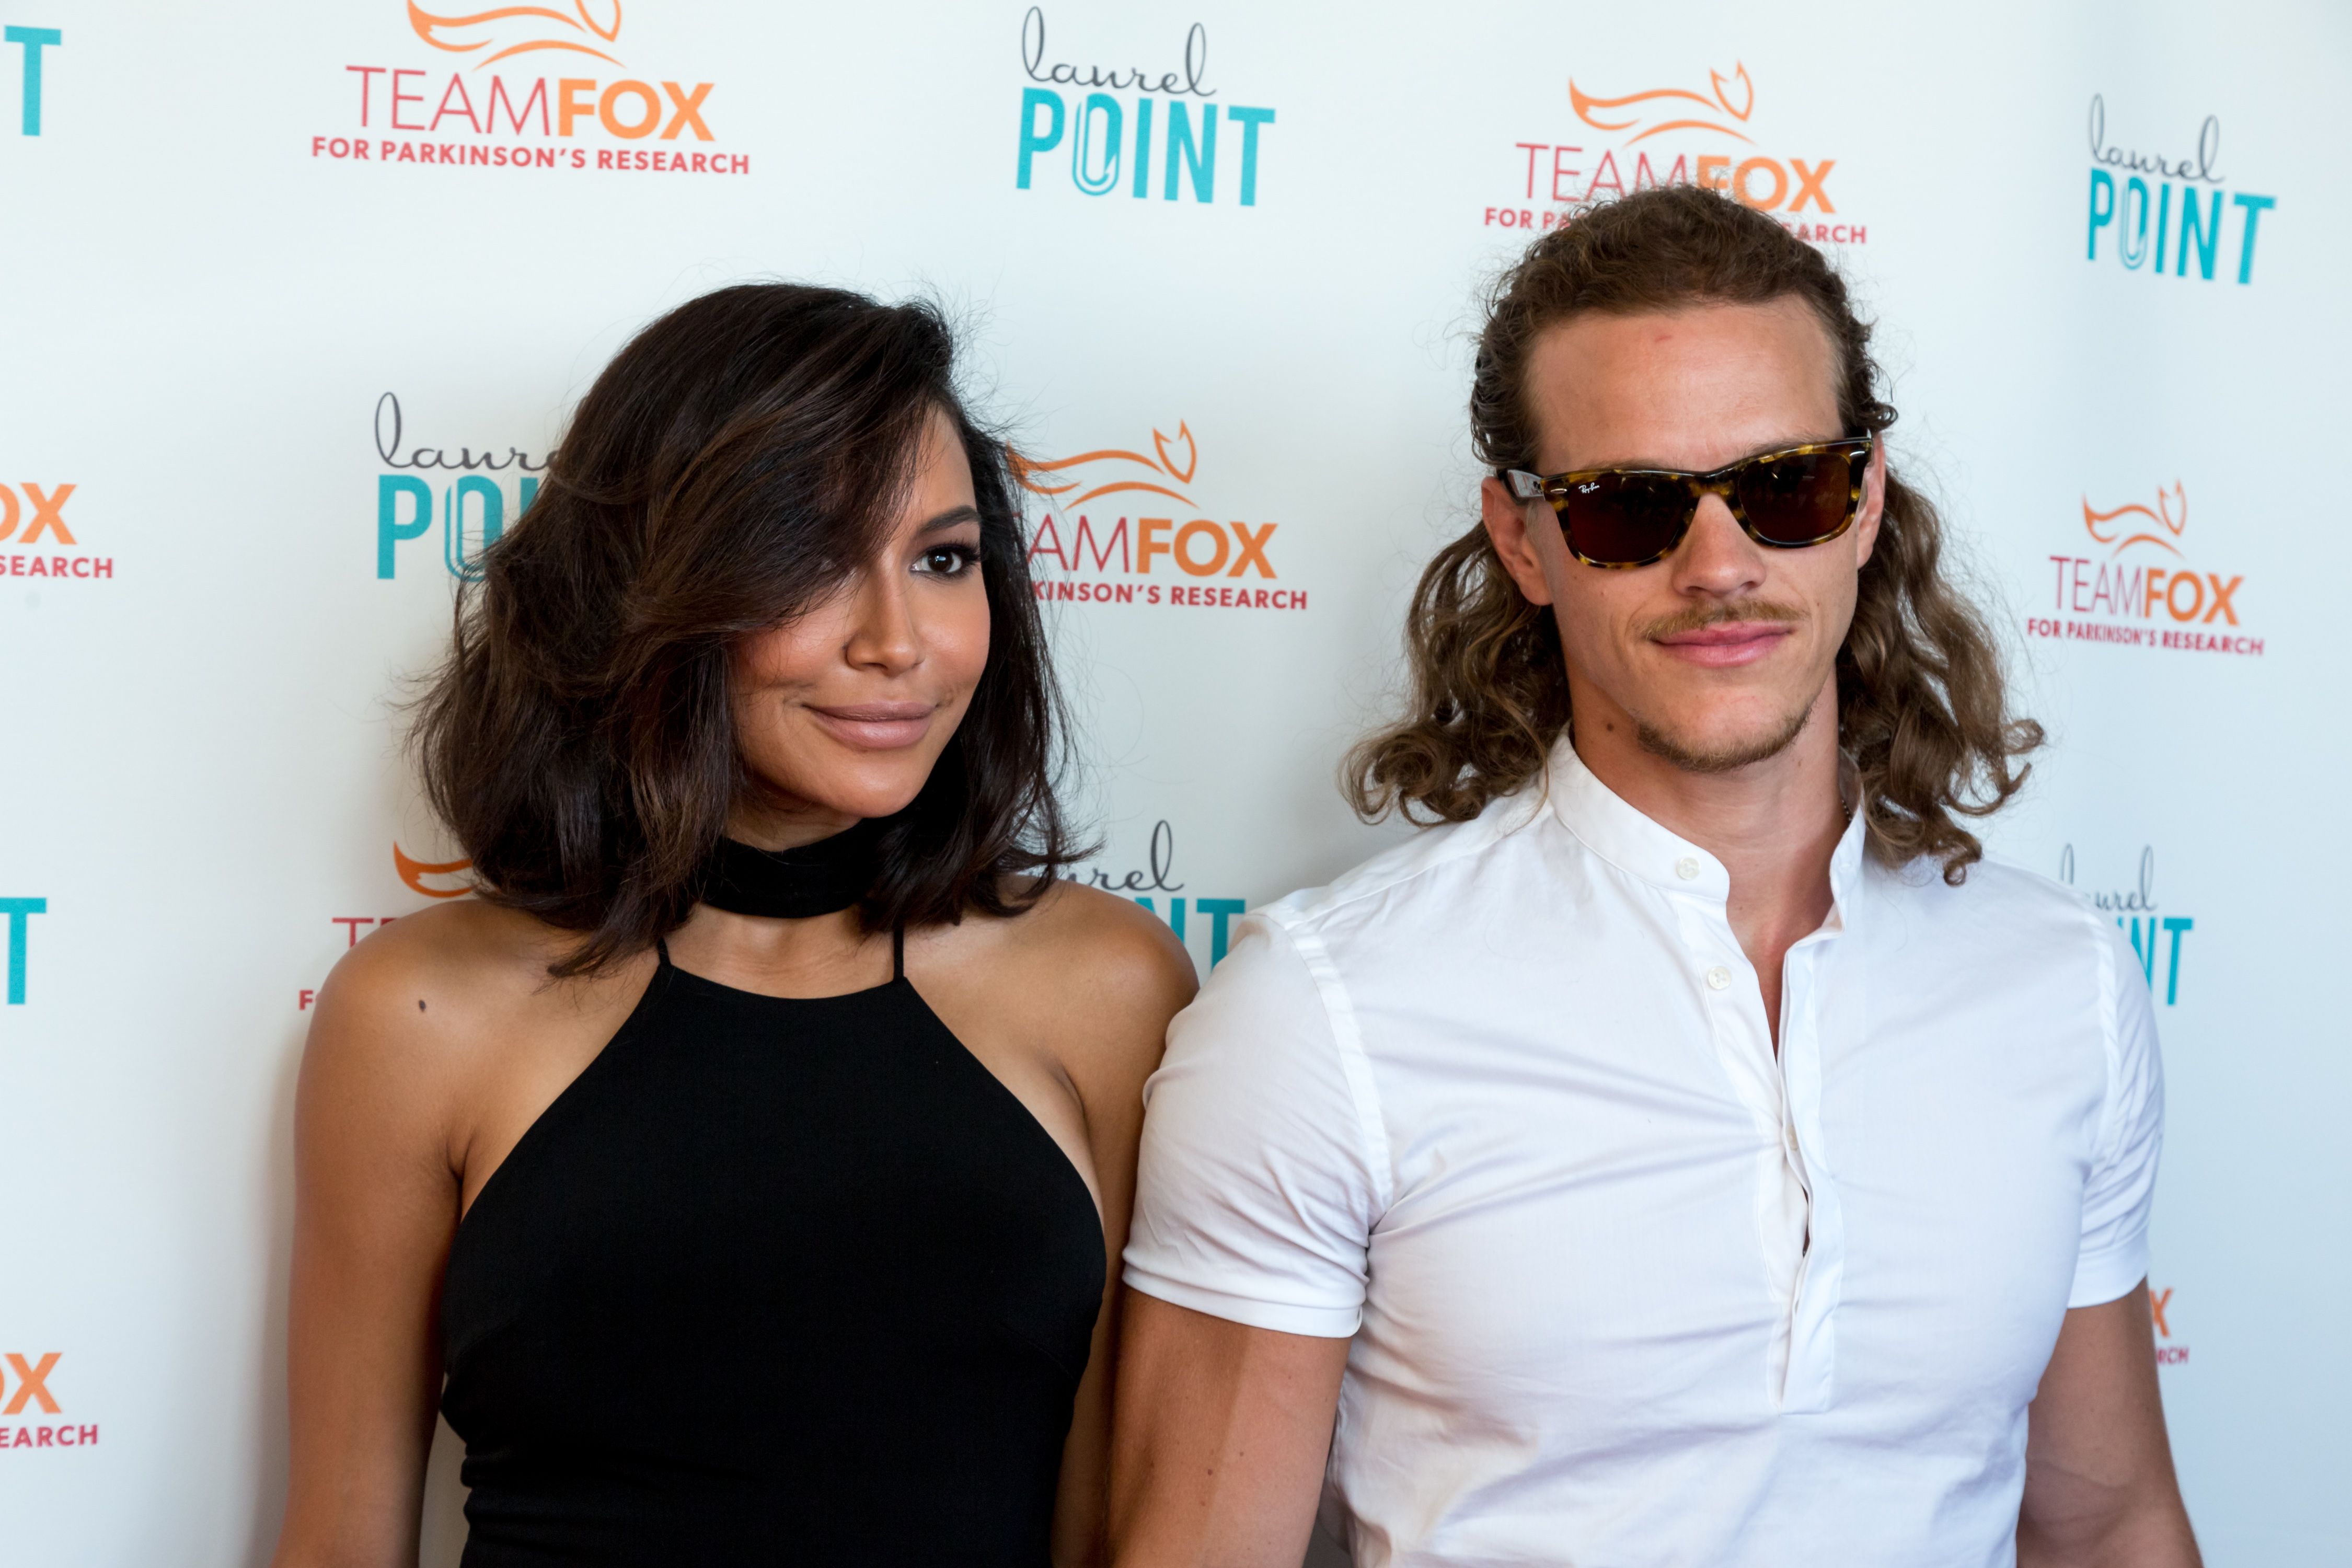 Naya Rivera and Ryan Dorsey arrive at the Raising The Bar To End Parkinson's at Laurel Point on July 27, 2016 in Studio City, California | Photo: Getty Images